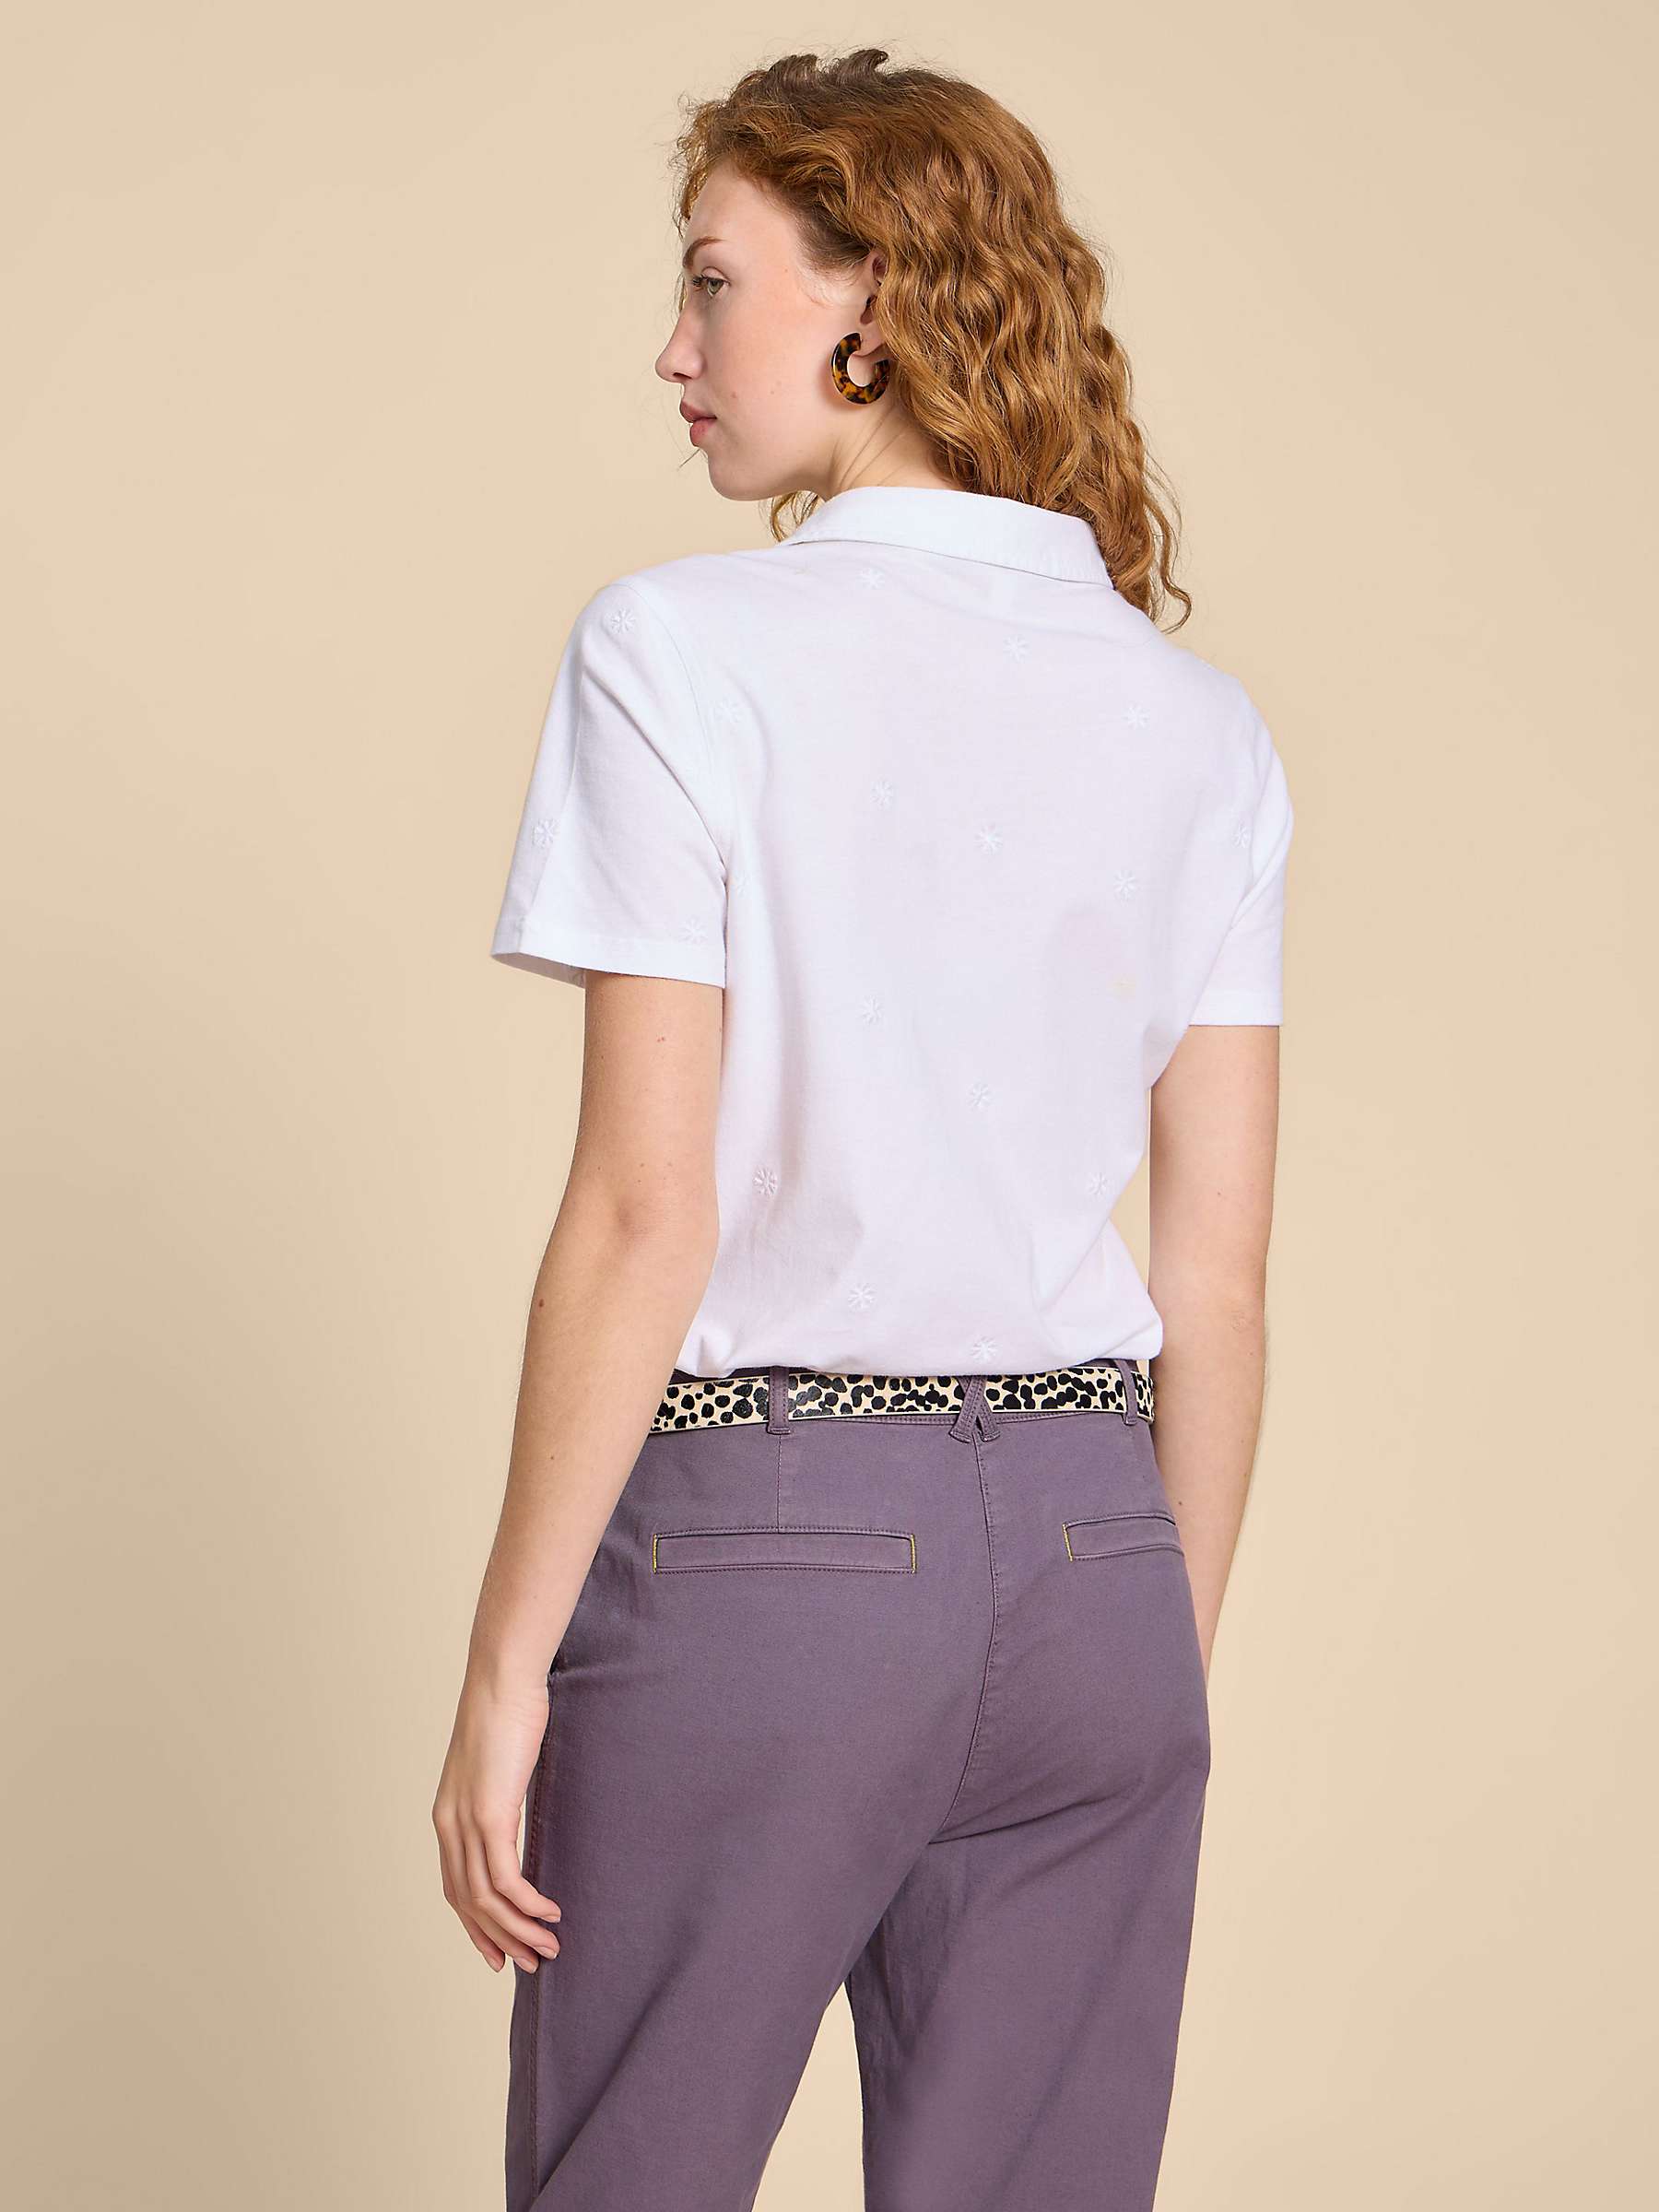 Buy White Stuff Penny Pocket Embroidered Shirt, Pale Ivory Online at johnlewis.com